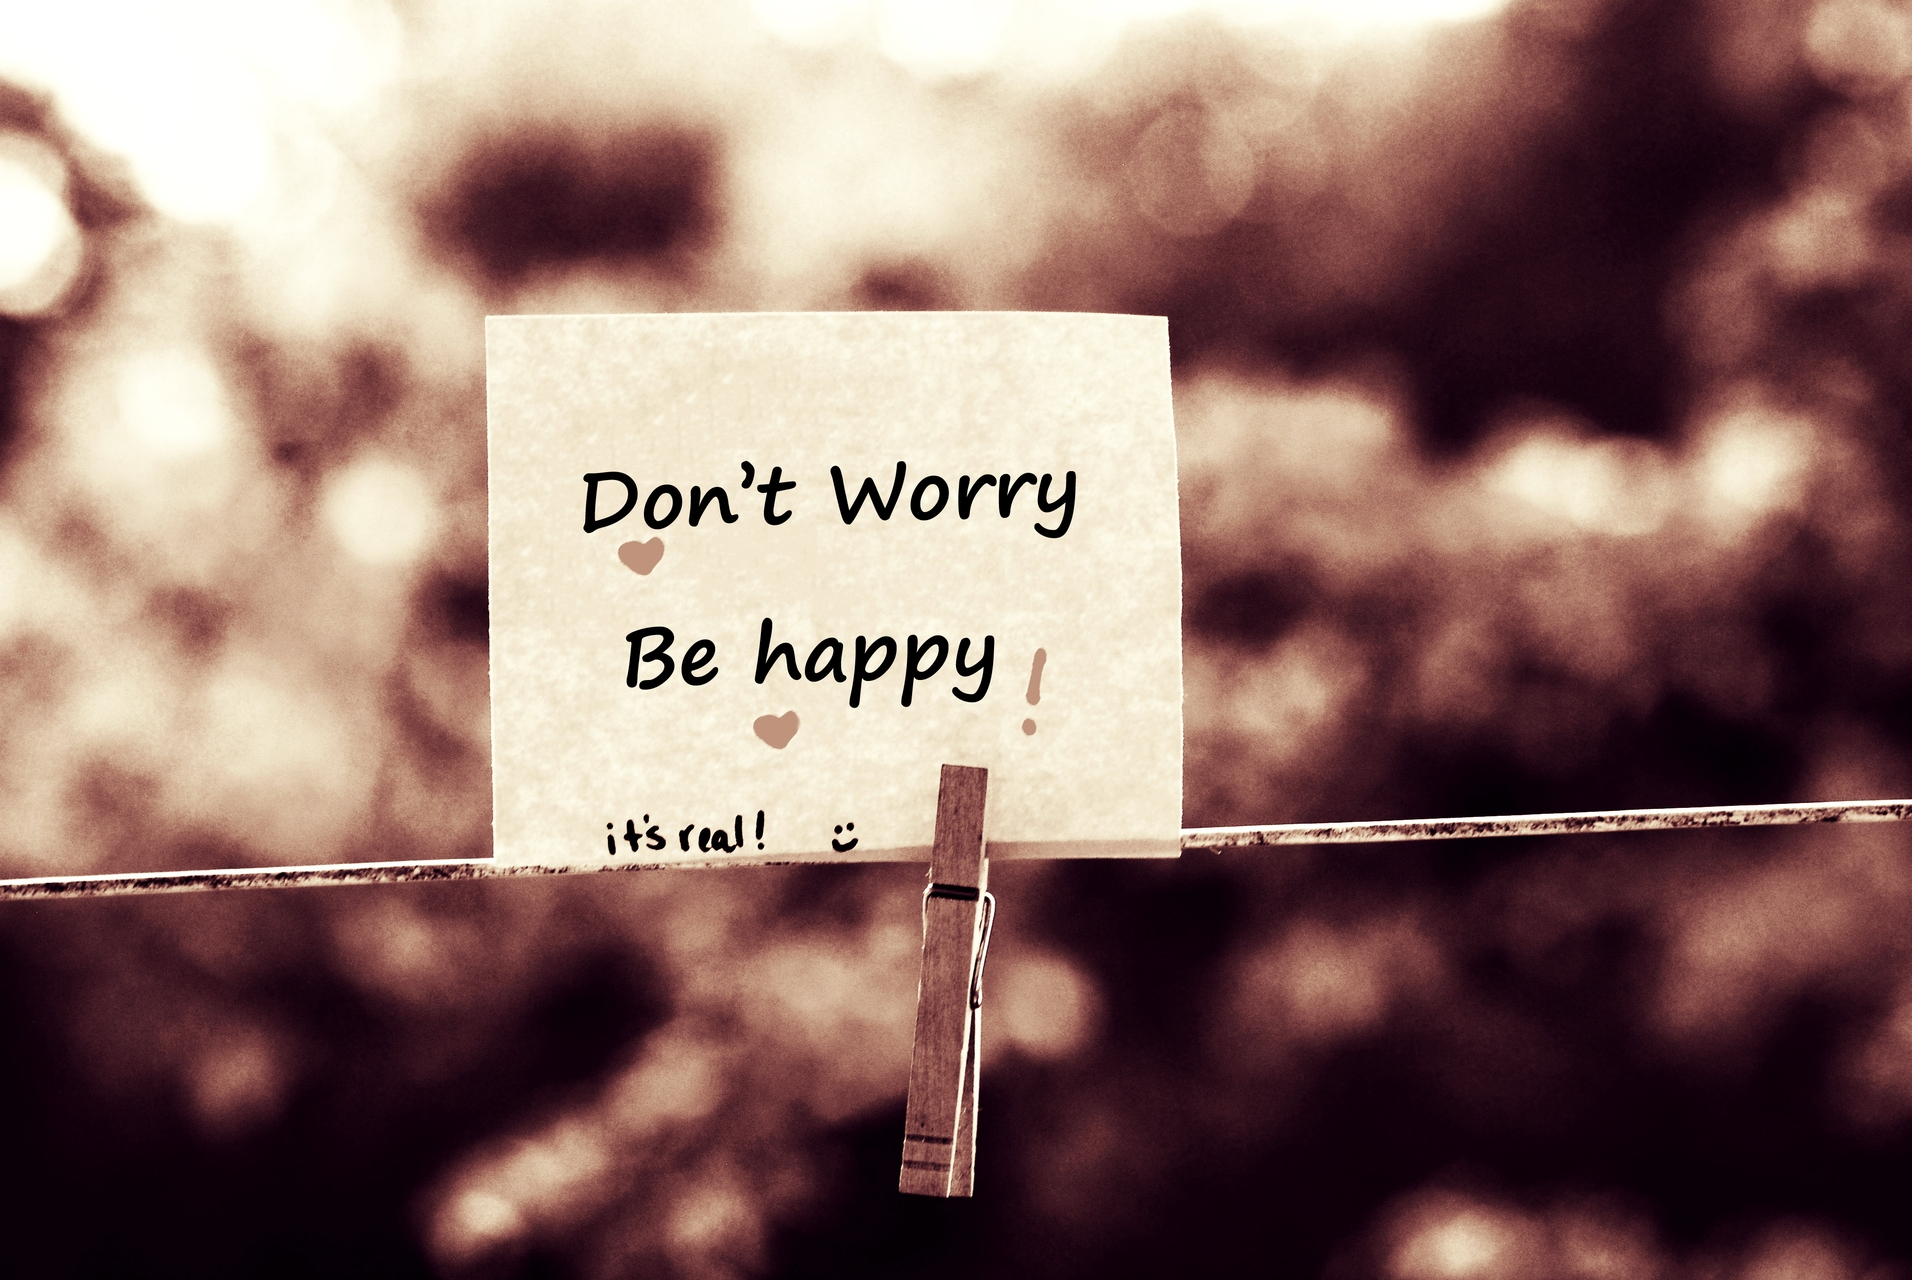 Be happy son. Don't worry be Happy. Don t worry be Happy картинки. Донт вори би Хэппи. Don't worry be Happy обои.